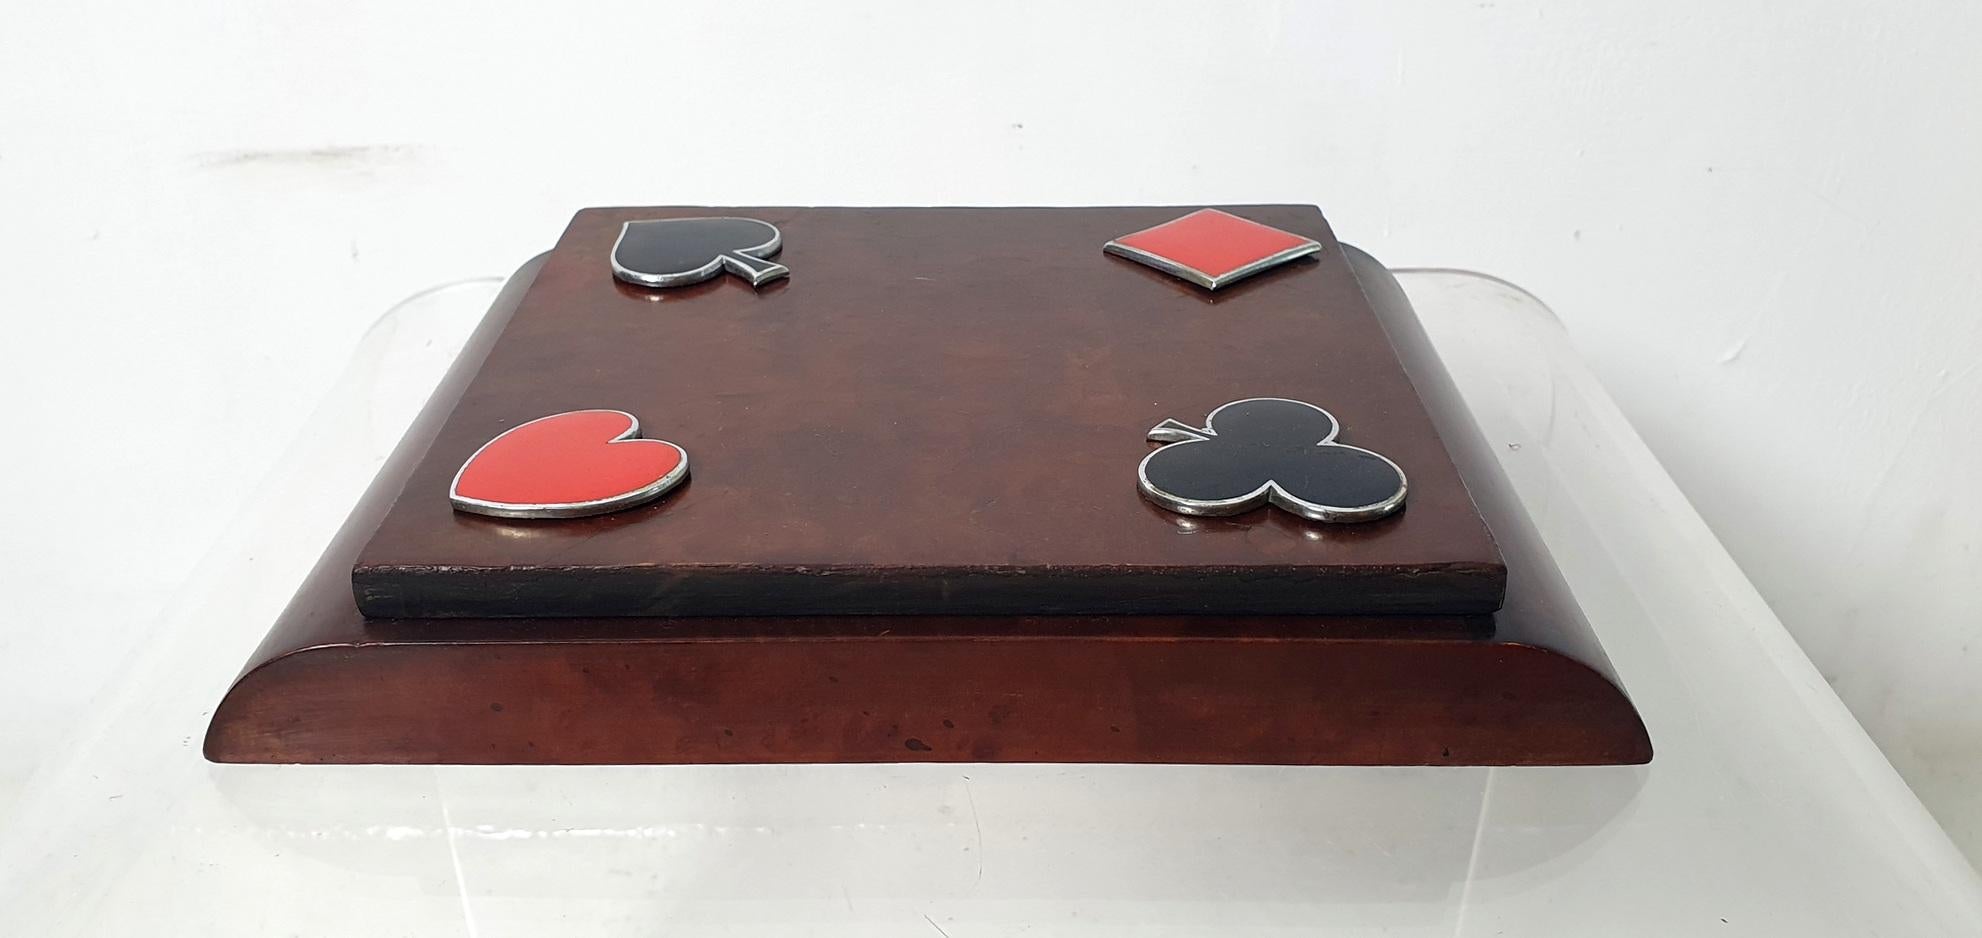 A box for playing cards made in maple with decor in chrome and enameled symbols for spades, hearts, cloves and diamonds. The box has a hinged lid and inside there are three compartments. This piece was handmade in Italy during the 1930's.  The card